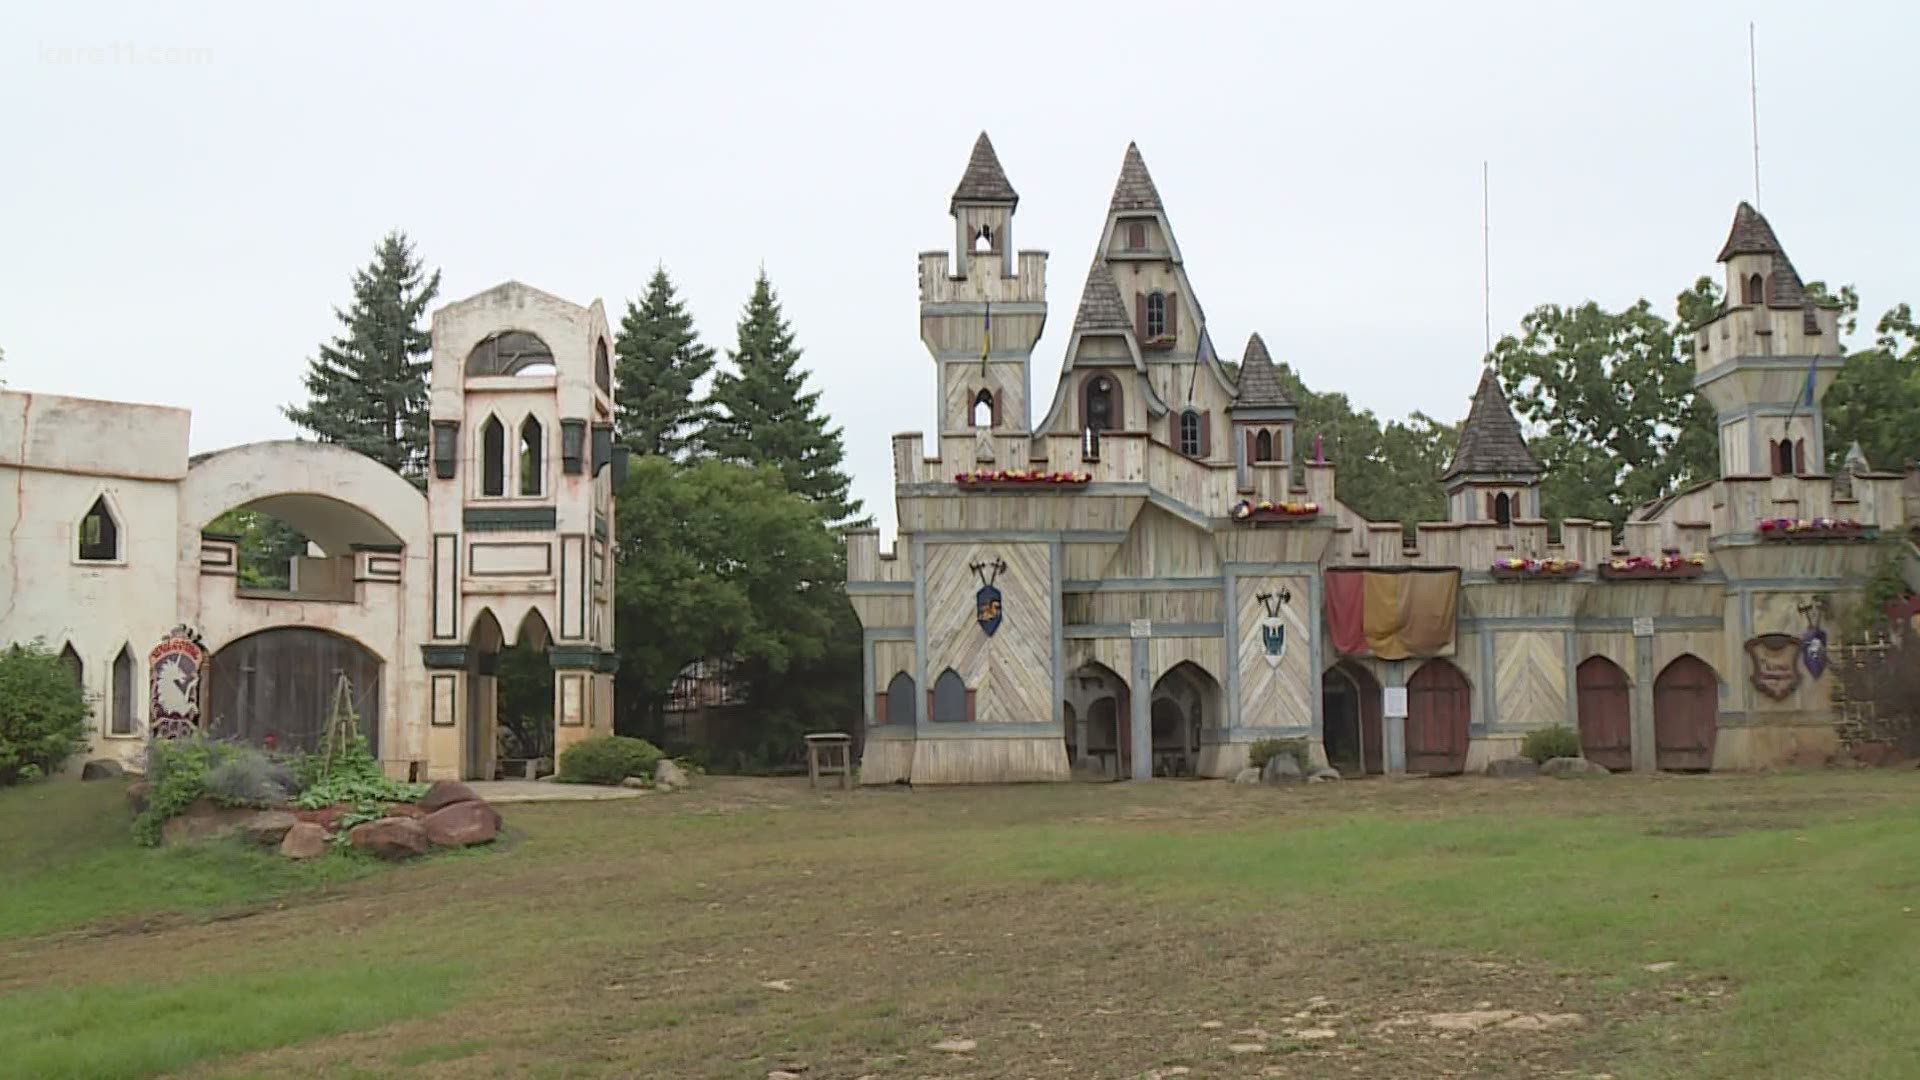 Taking a page from the State Fair, the Minnesota Renaissance Festival will be morphing into a drive-thru experience, with food and the fair's iconic characters.